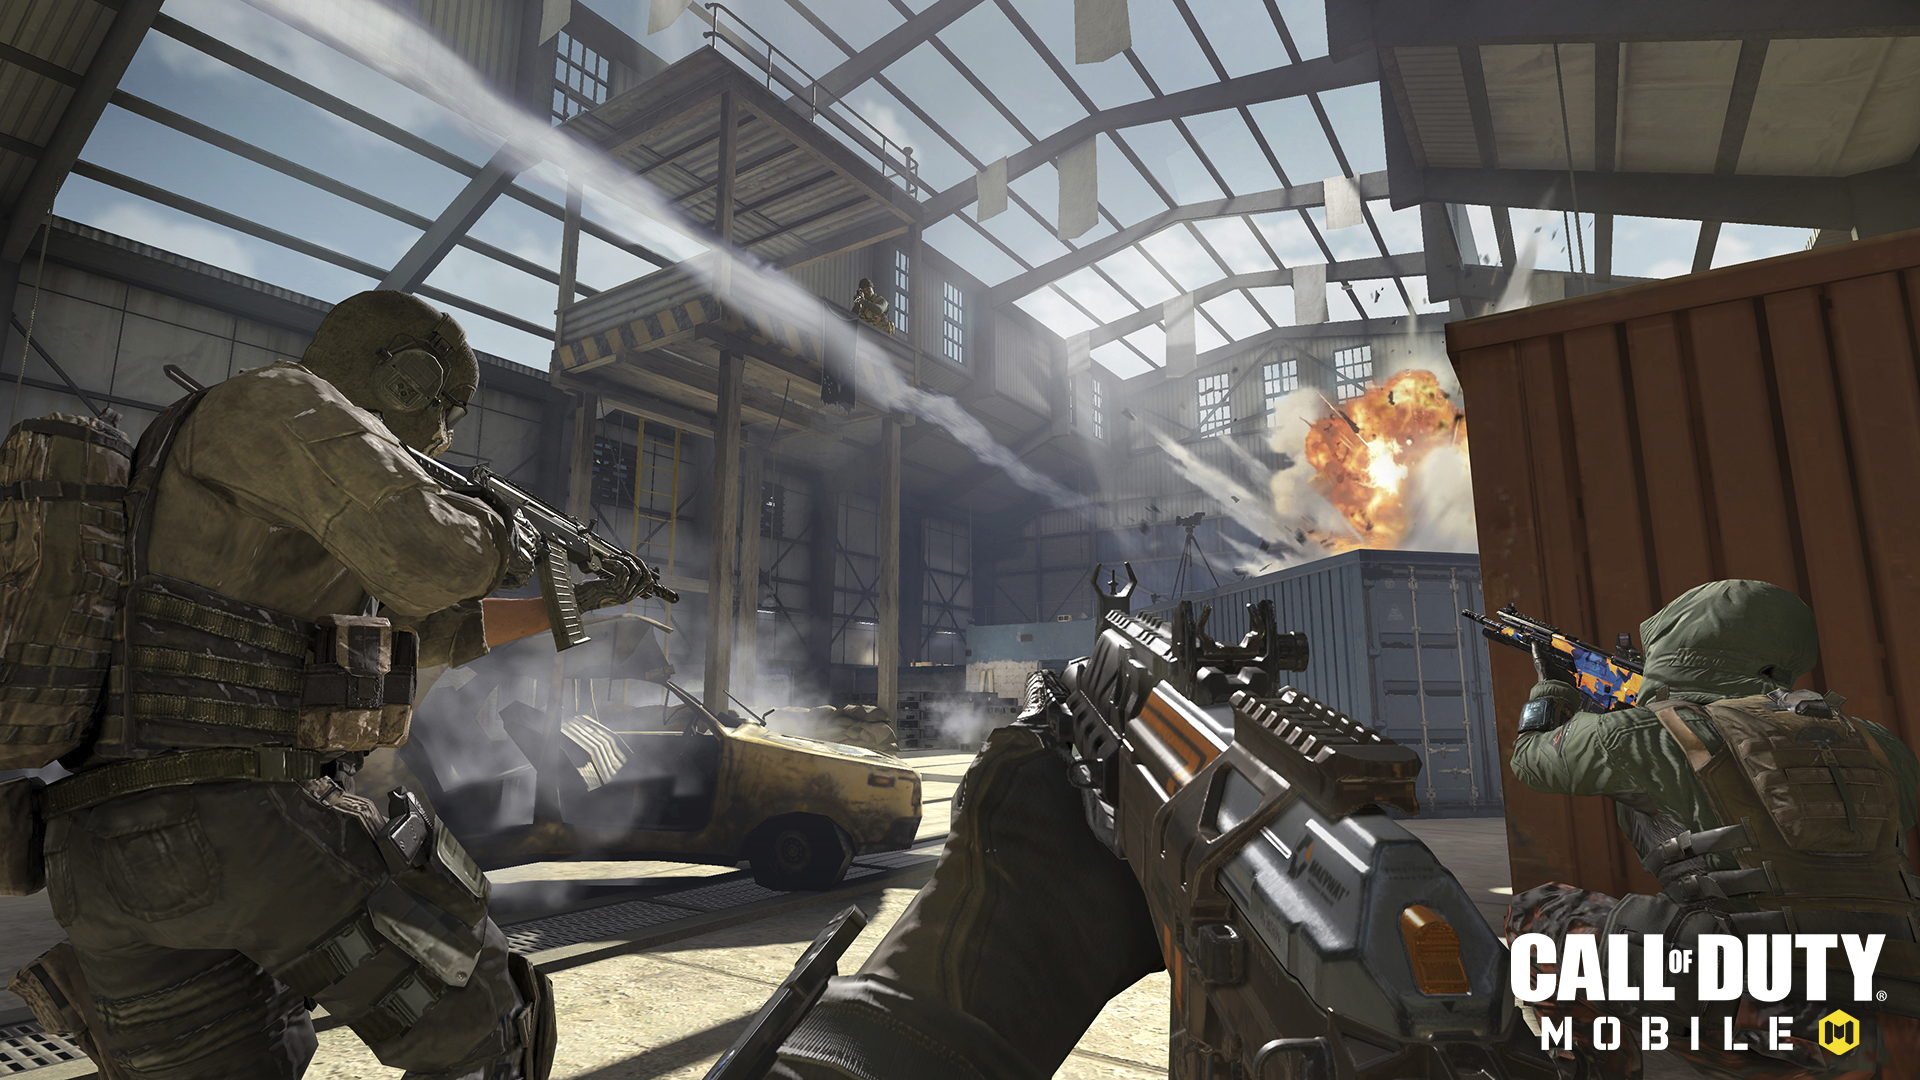 call of duty: mobile, video game